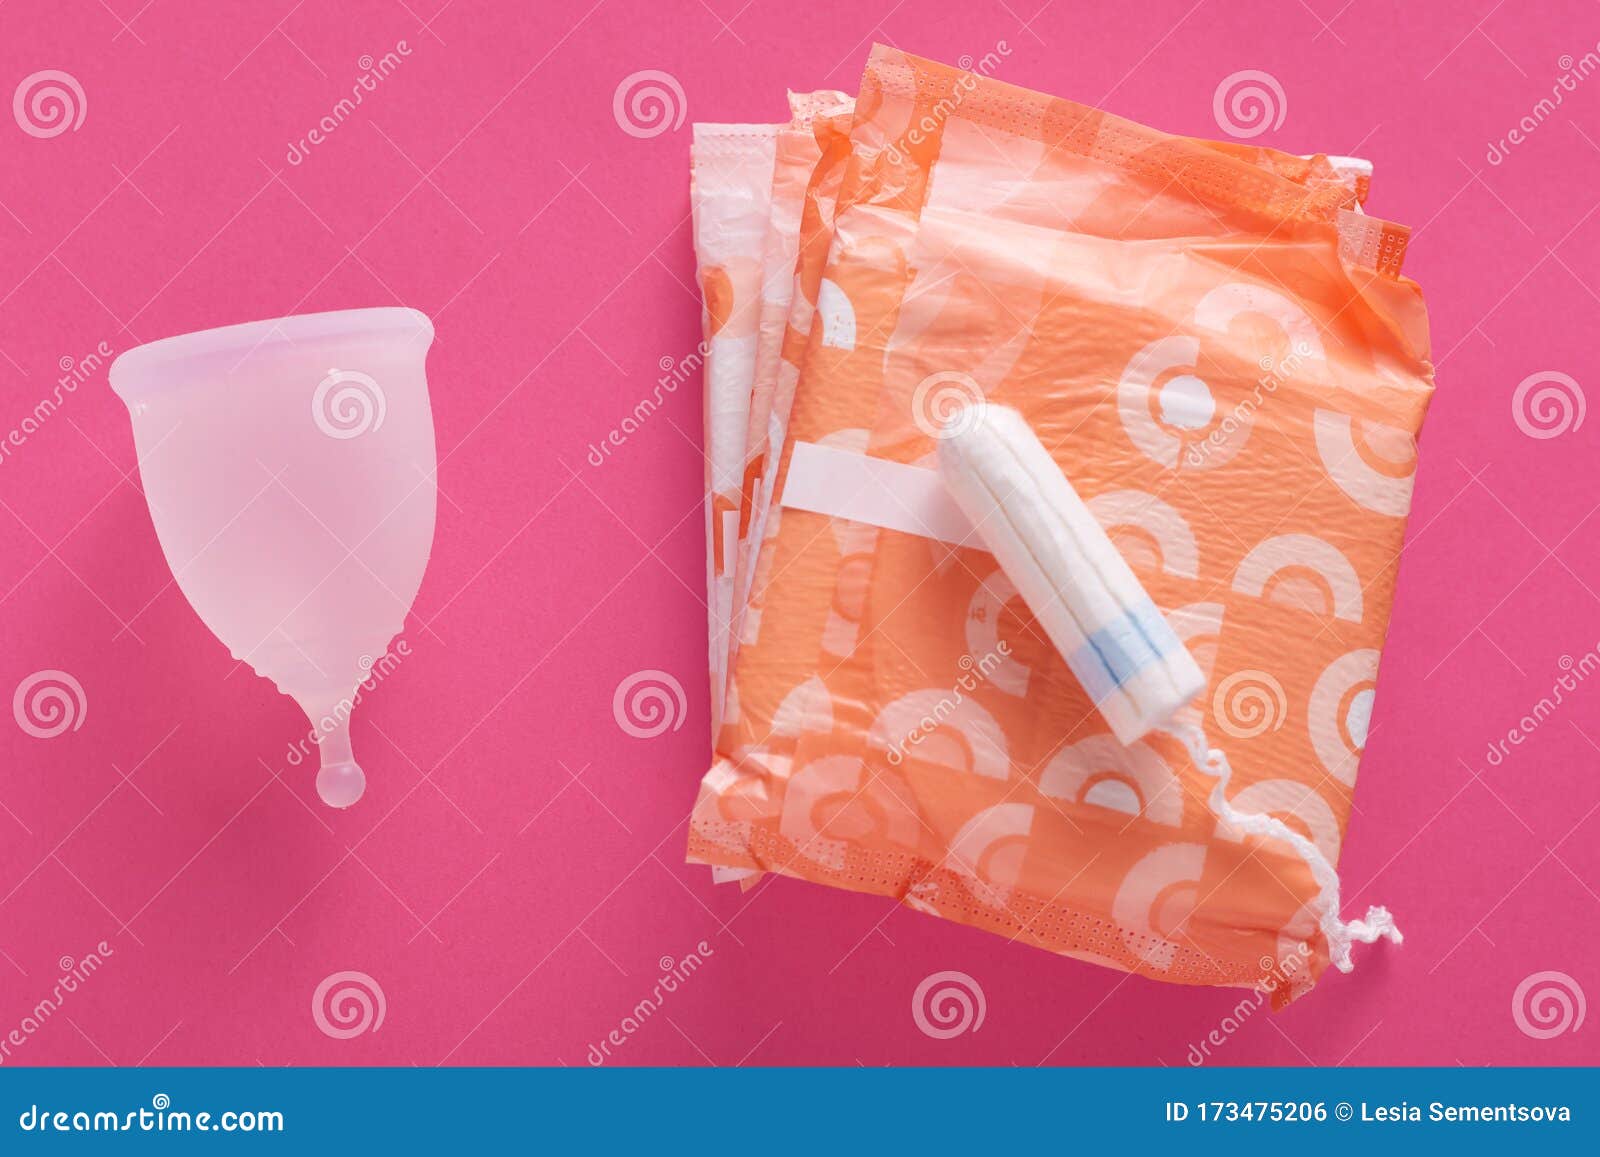  Intimate Care & Hygiene: Health & Personal Care: Sanitary Napkins,  Tampons, Intimate Care & More